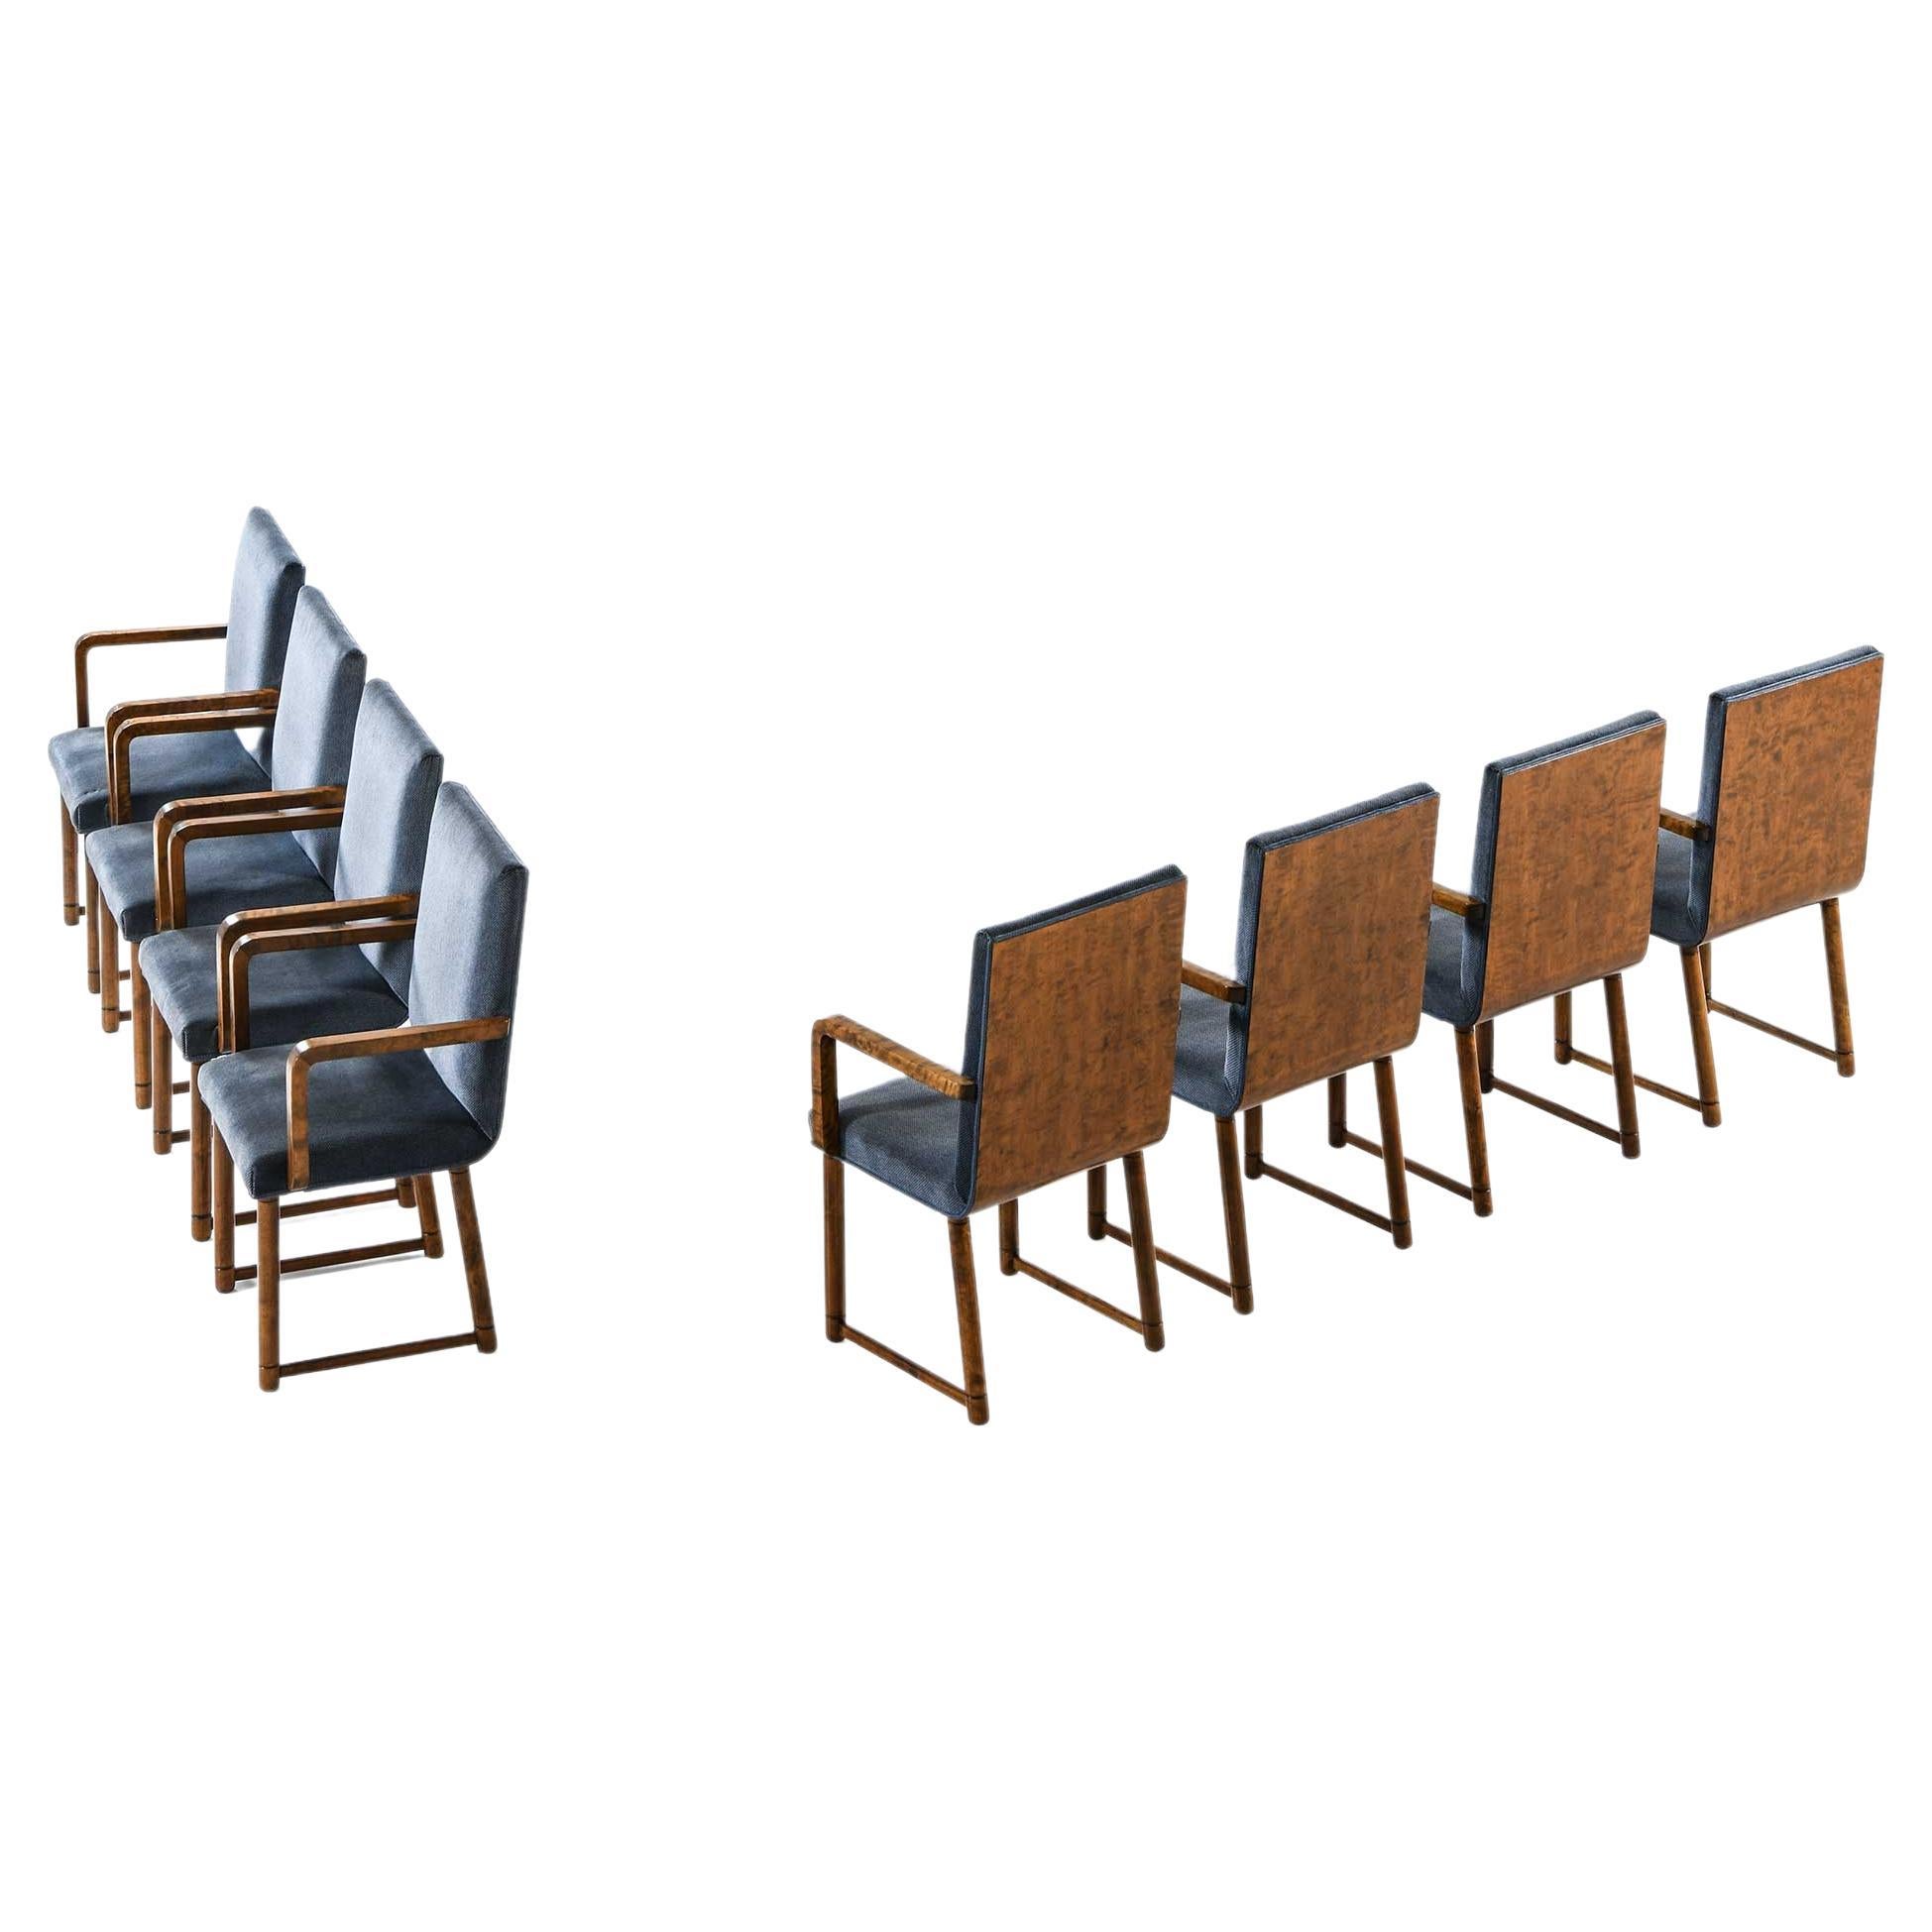 Set of 8 armchairs produced in 1930's in Finland For Sale